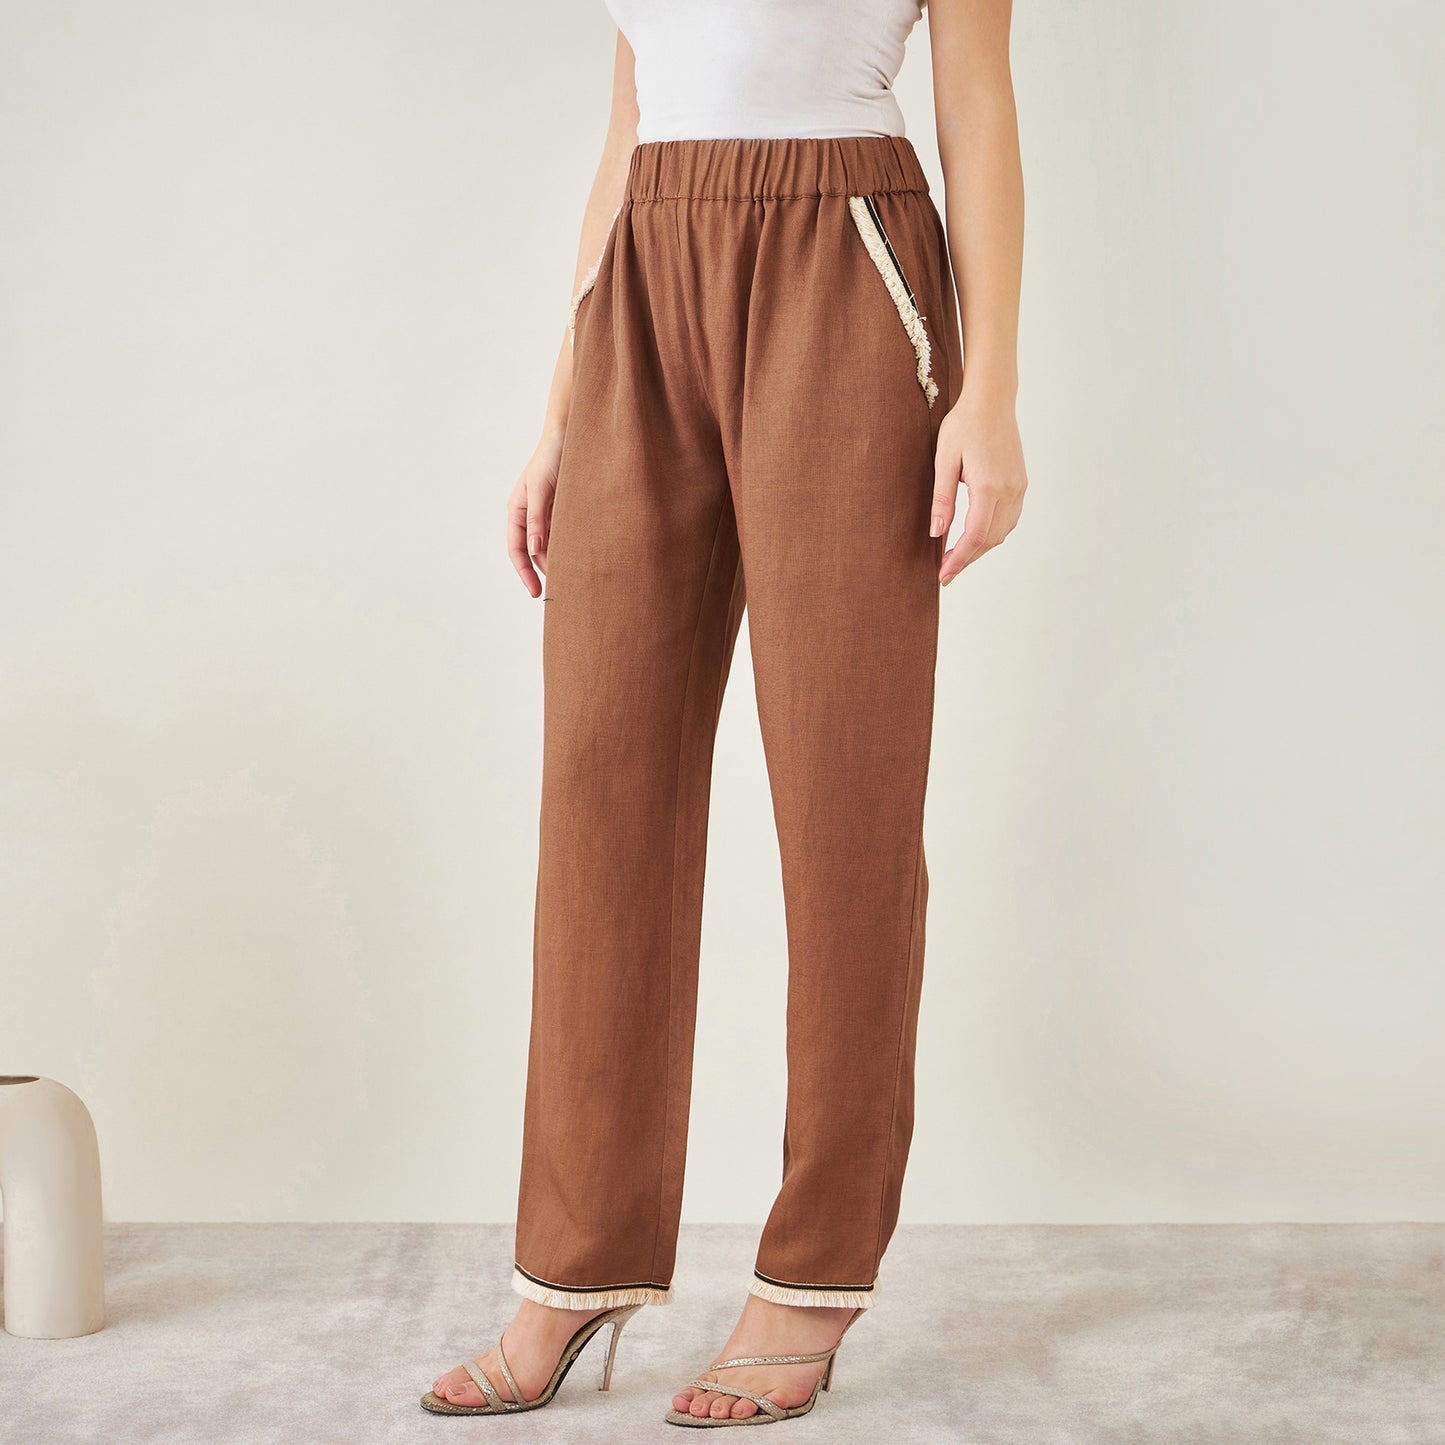 Brown Linen Shirt with Lace Detail and Pants Set